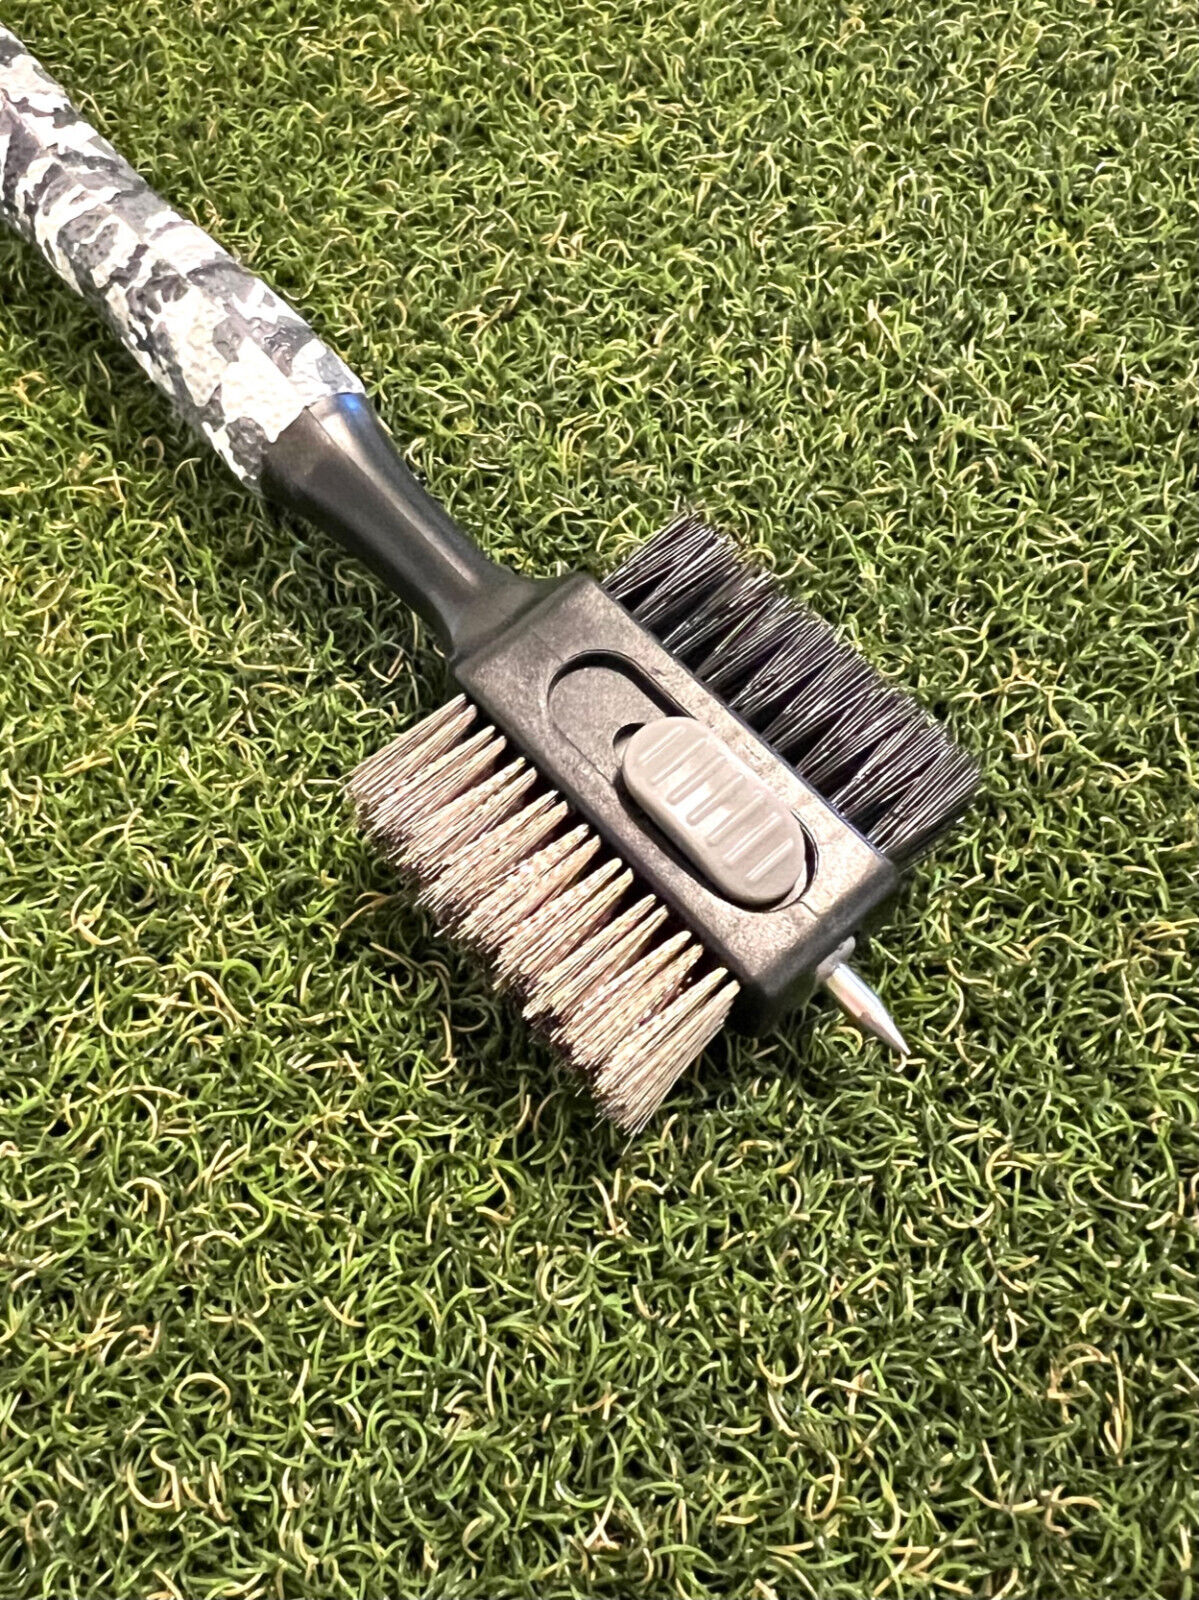 Camo Golf Club Cleaning Brush Magnetic Release/Retractable Spike